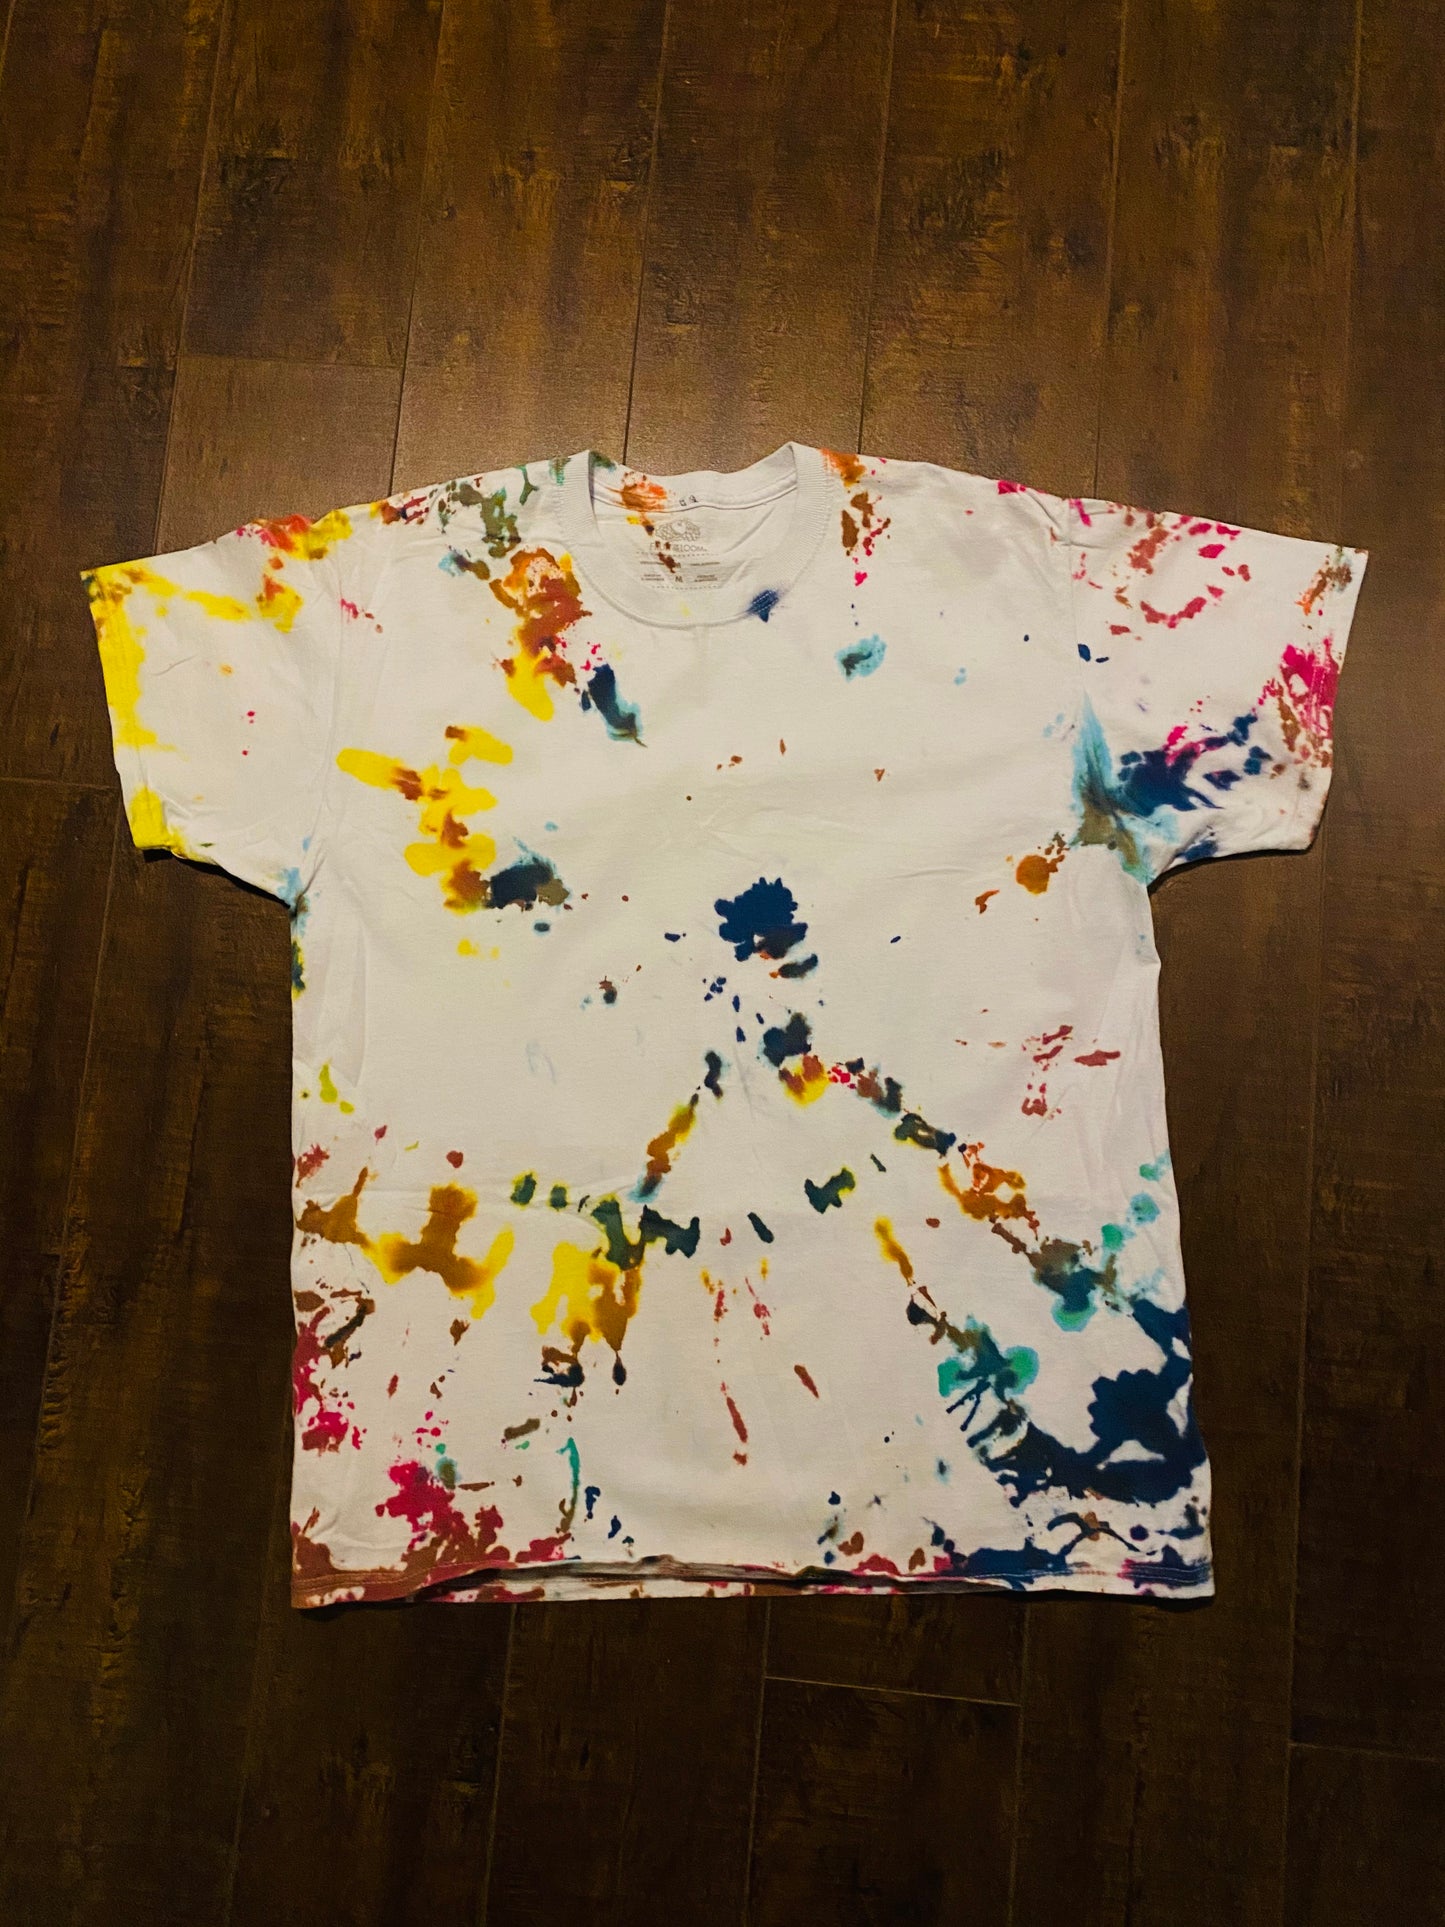 Drips dyed shirt